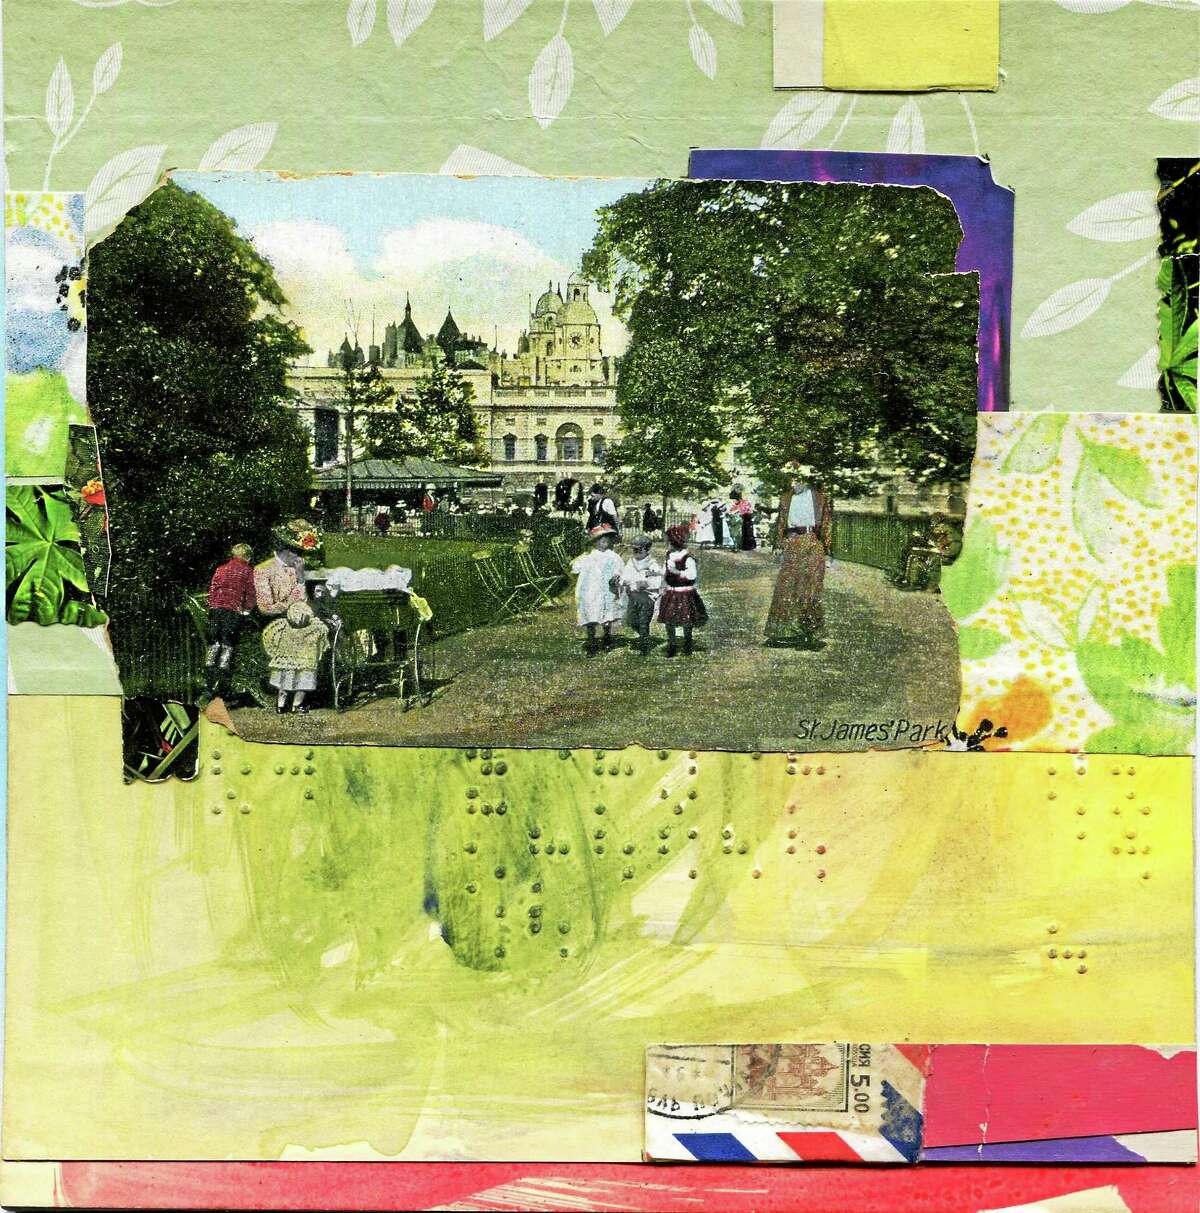 Contributed photo Award winning collage artist Cheryl Dawdy will have a month long showing of her most recent collages at Middletown Framing Gallery in downtown Middletown through Aug. 28. Above, "St. James Park" by Dawdy.